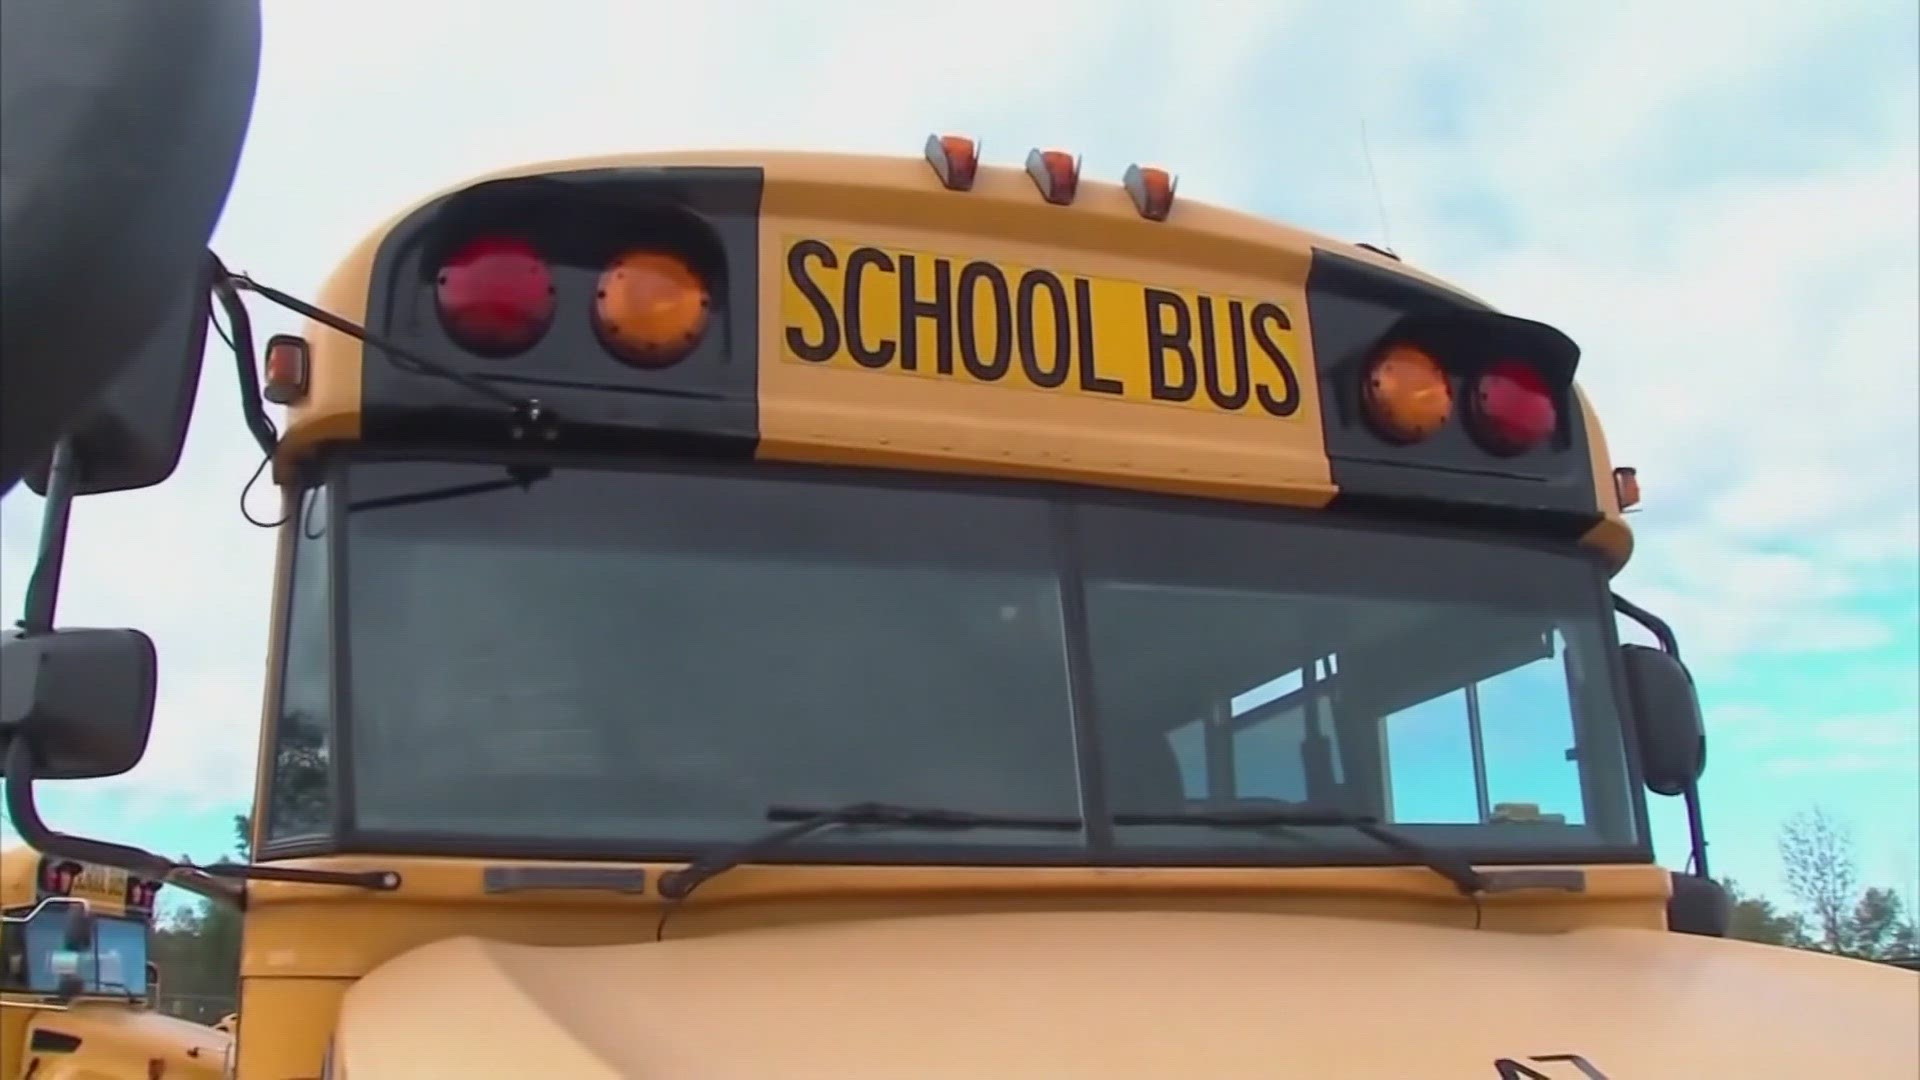 The group was made after an 11-year-old boy was killed and 23 others were injured in a Clark County school bus crash last August.